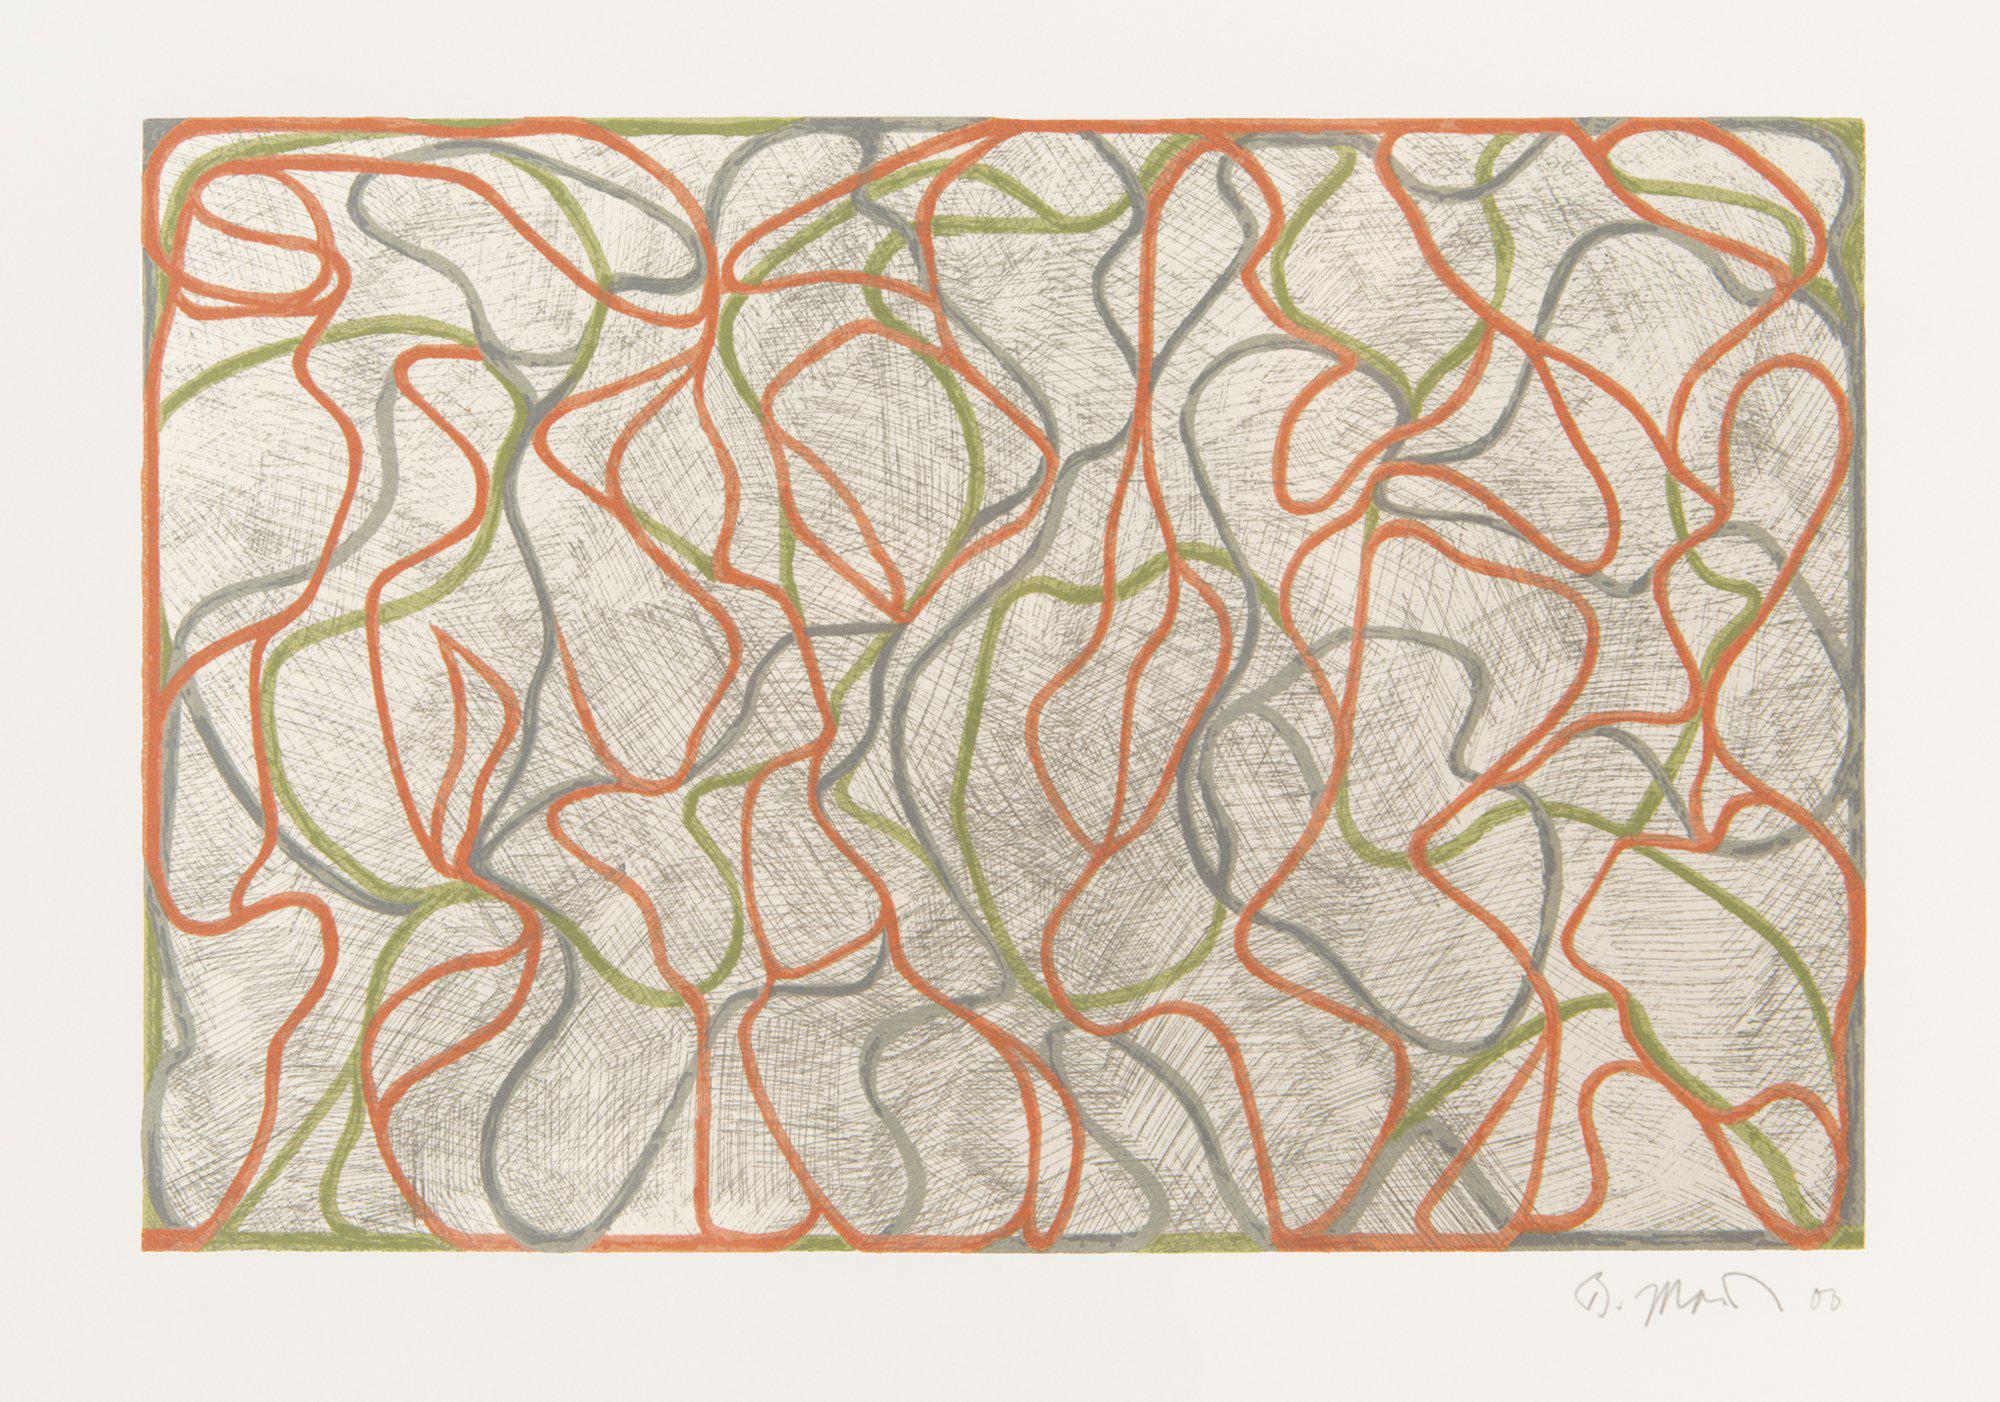 Brice Marden - Distant Muses for Sale | Artspace